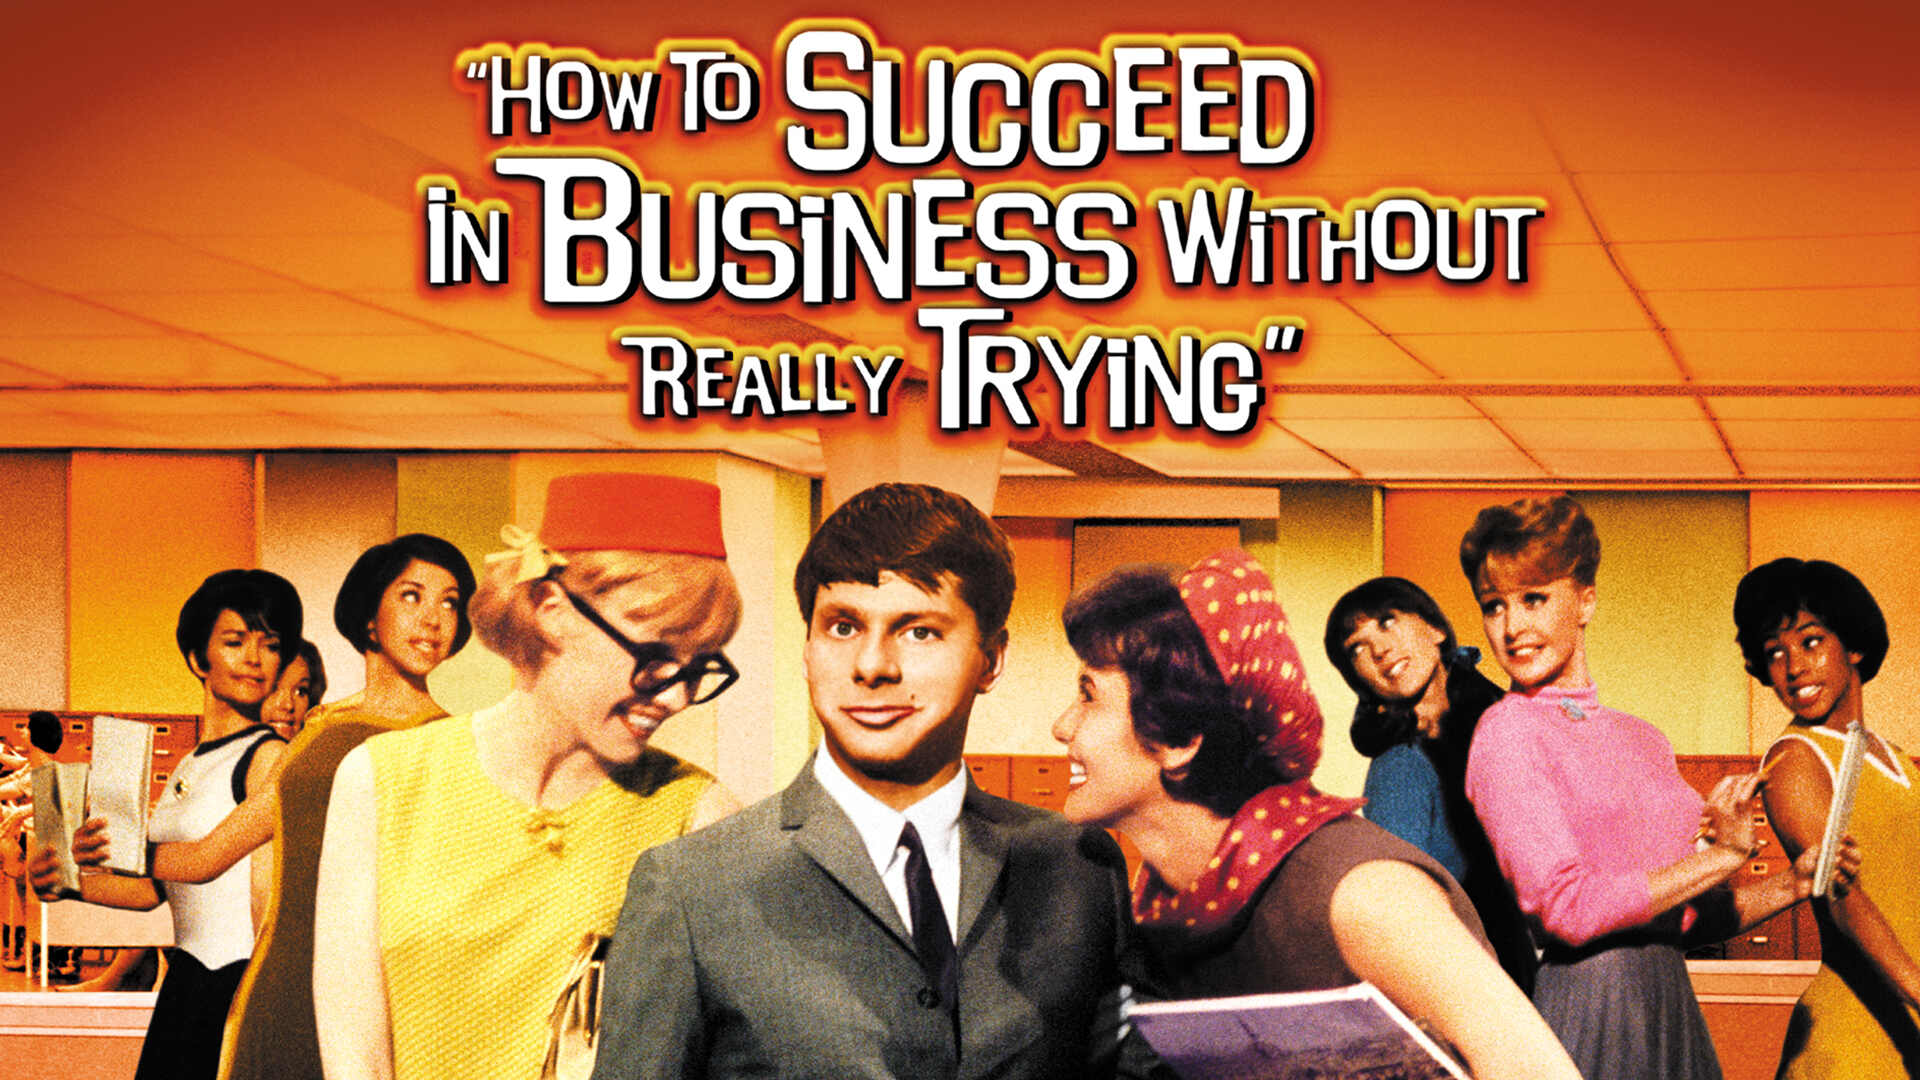 33-facts-about-the-movie-how-to-succeed-in-business-without-really-trying